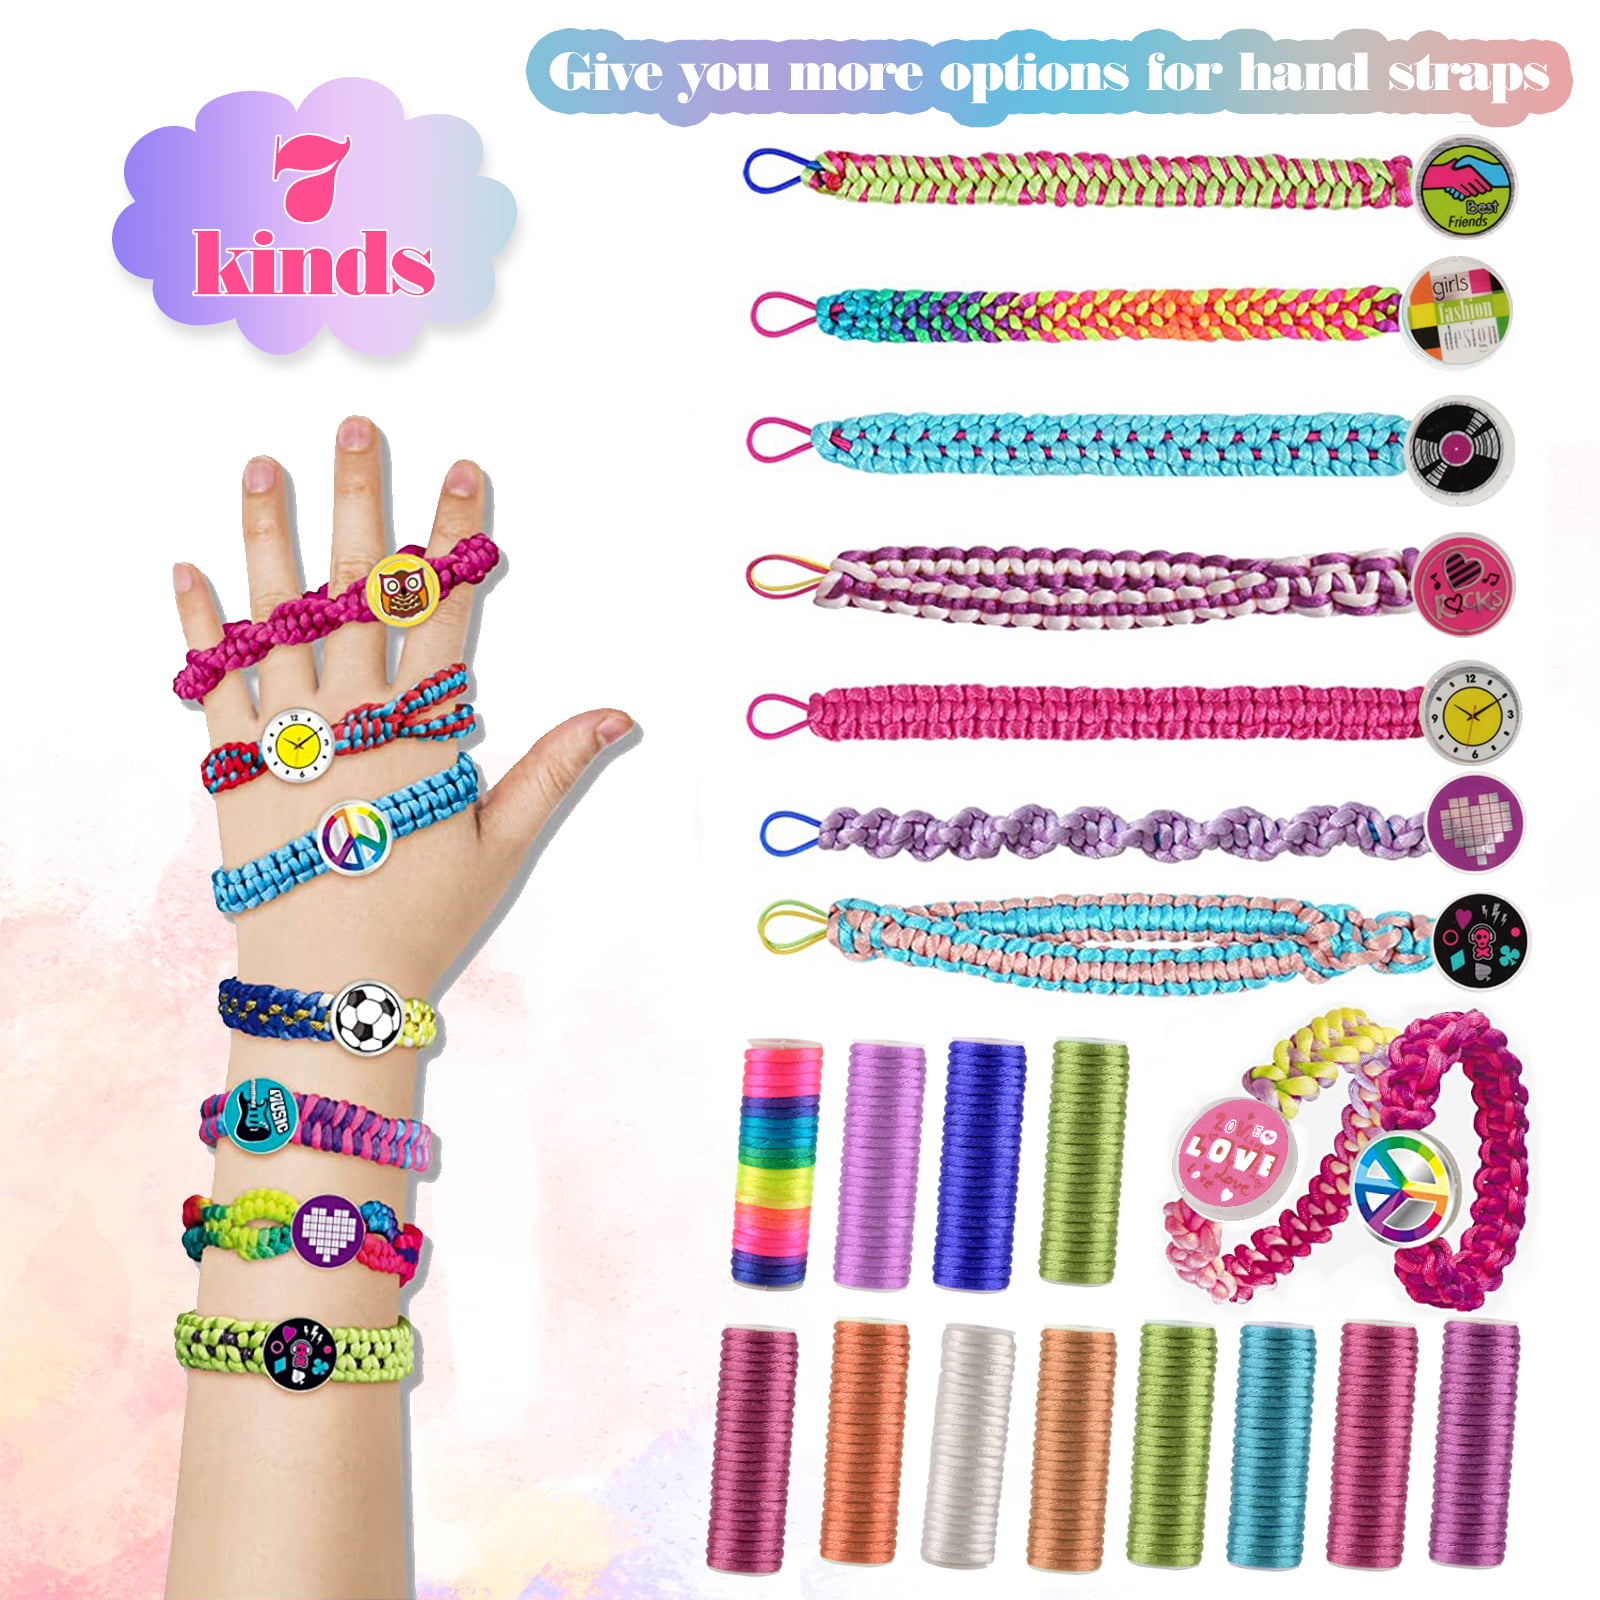 CITSKY Friendship Bracelet Making Kits for Girls: Gifts for 6 7 8 9 10 Year Old Girl | Craft Kit for Girls Ages 5-12 | Jewelry Making Kits As Birthday